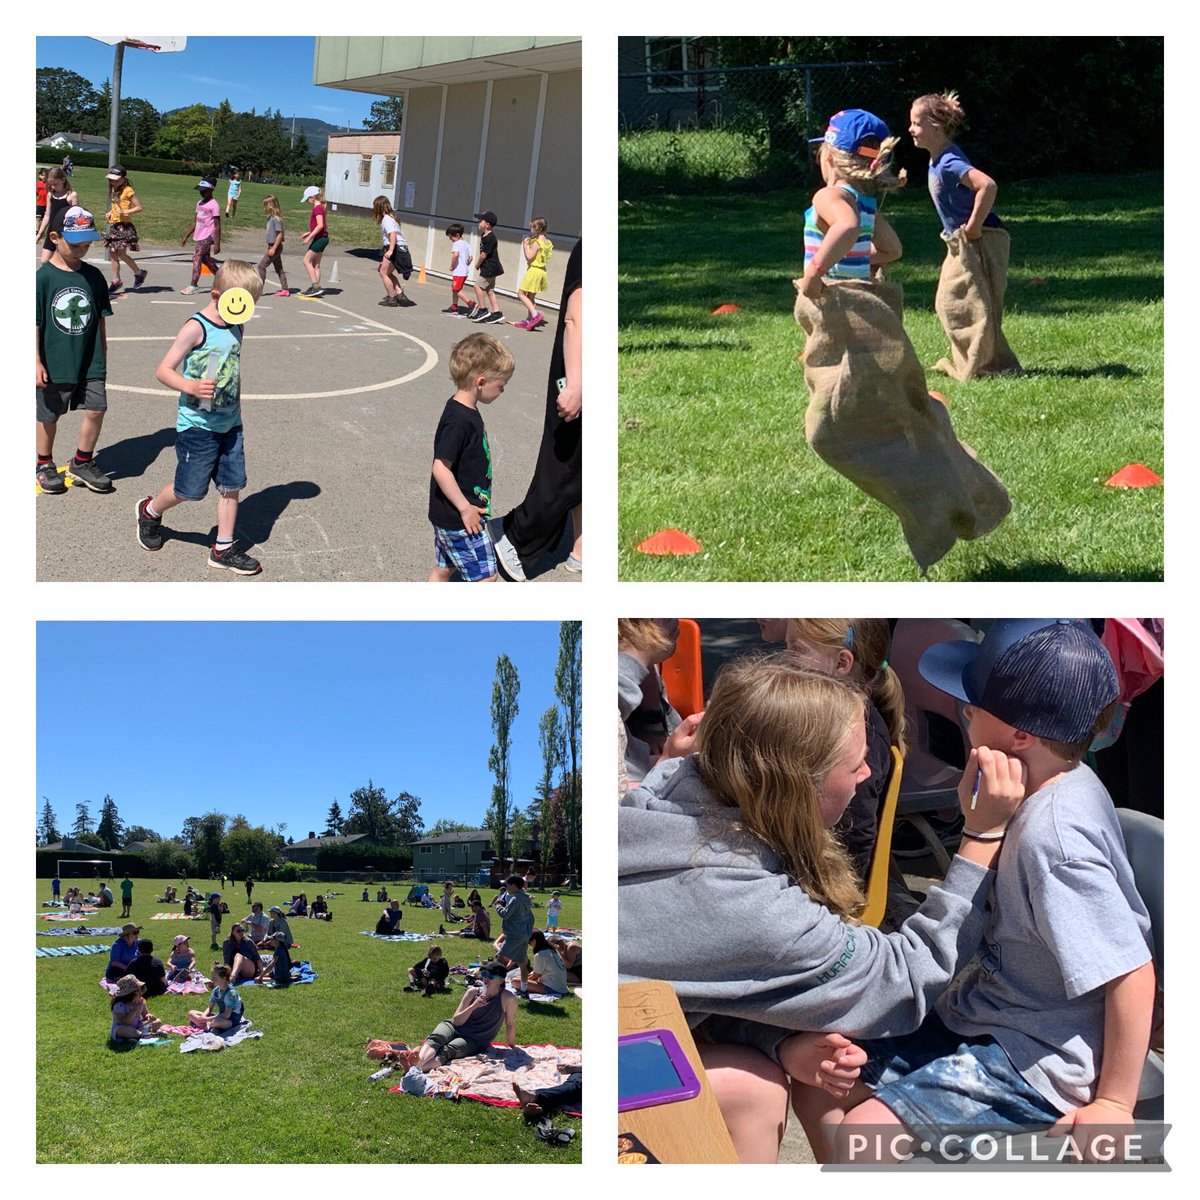 Friday Fun Day fun! Great day of games, face painting, bubbles and of course dancing! Sun was shining bright and laughter was heard everywhere. Thank you to @brentwoodpac for organizing the concession and fun lunch. Thank you to @FairwayMarket for donating oranges. @sd63schools